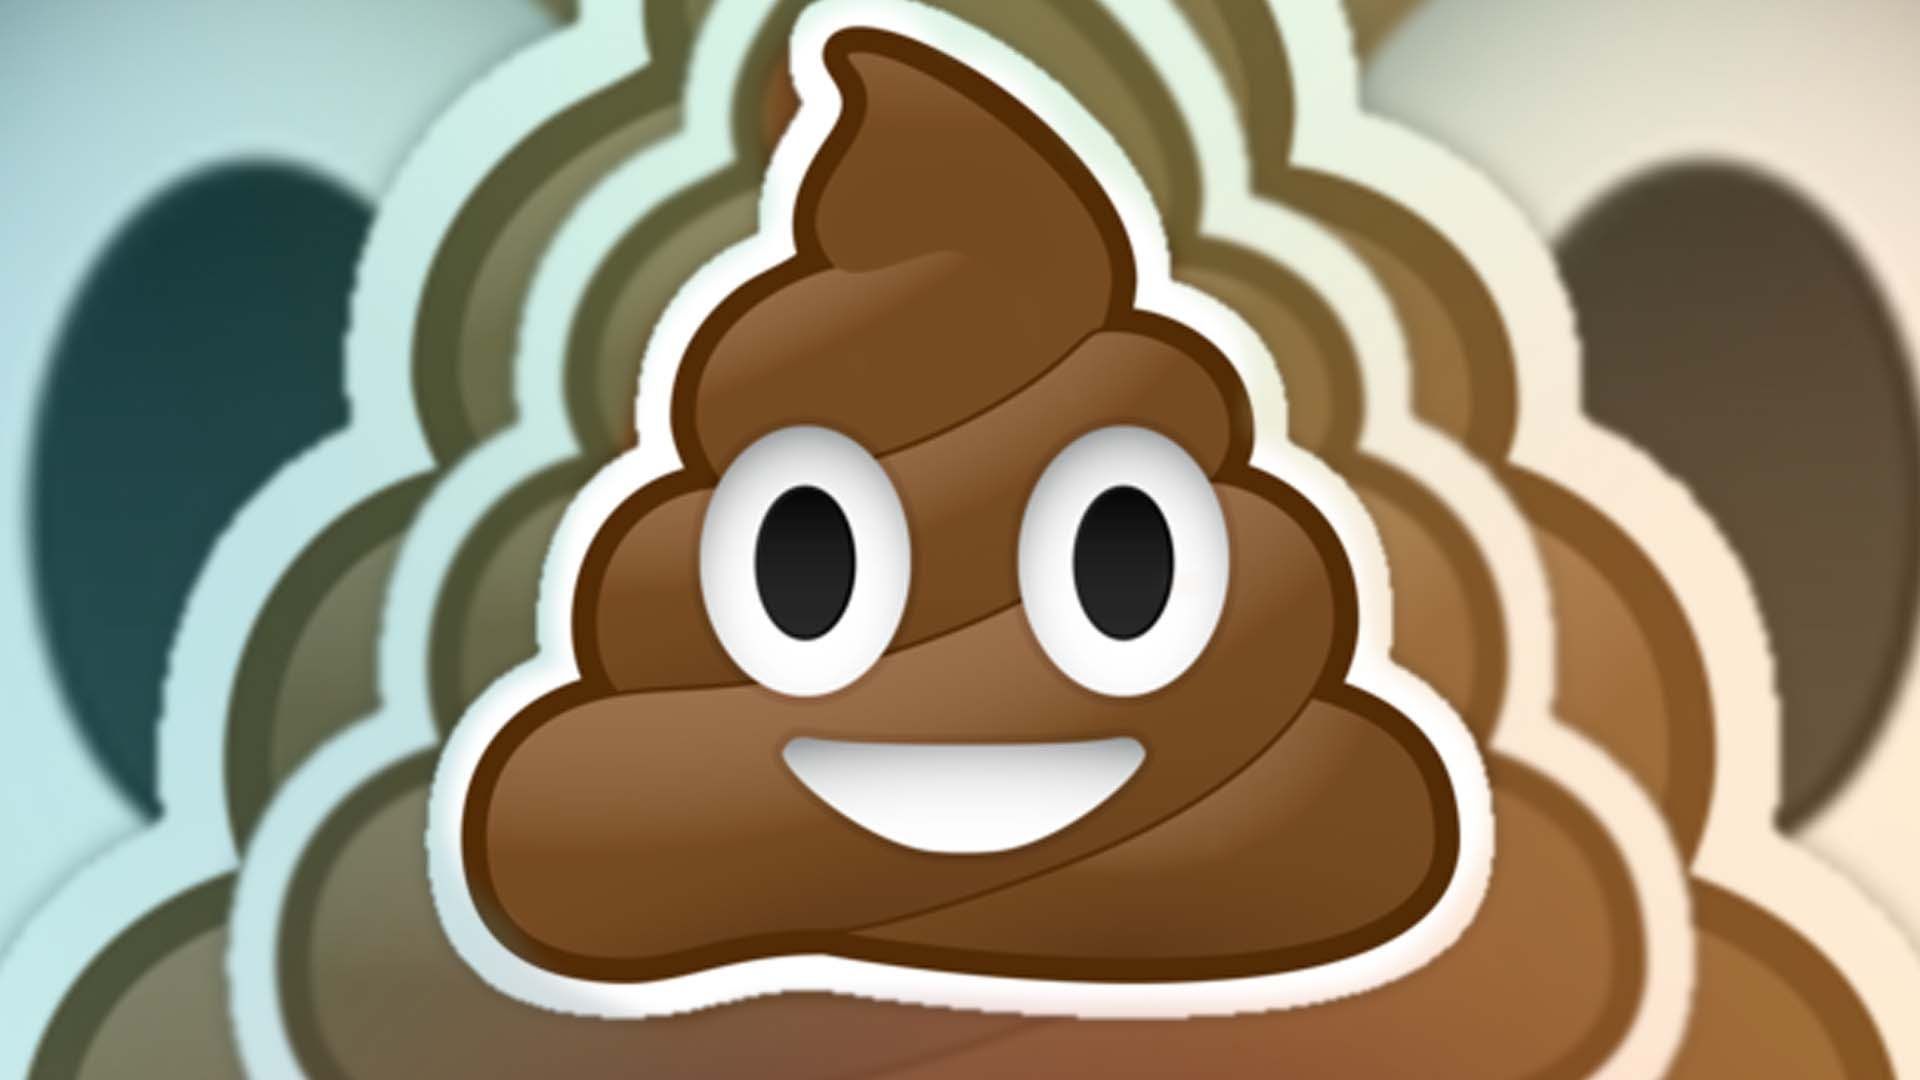 Repeat Poo wallpaper by BGQueen  Download on ZEDGE  02bc